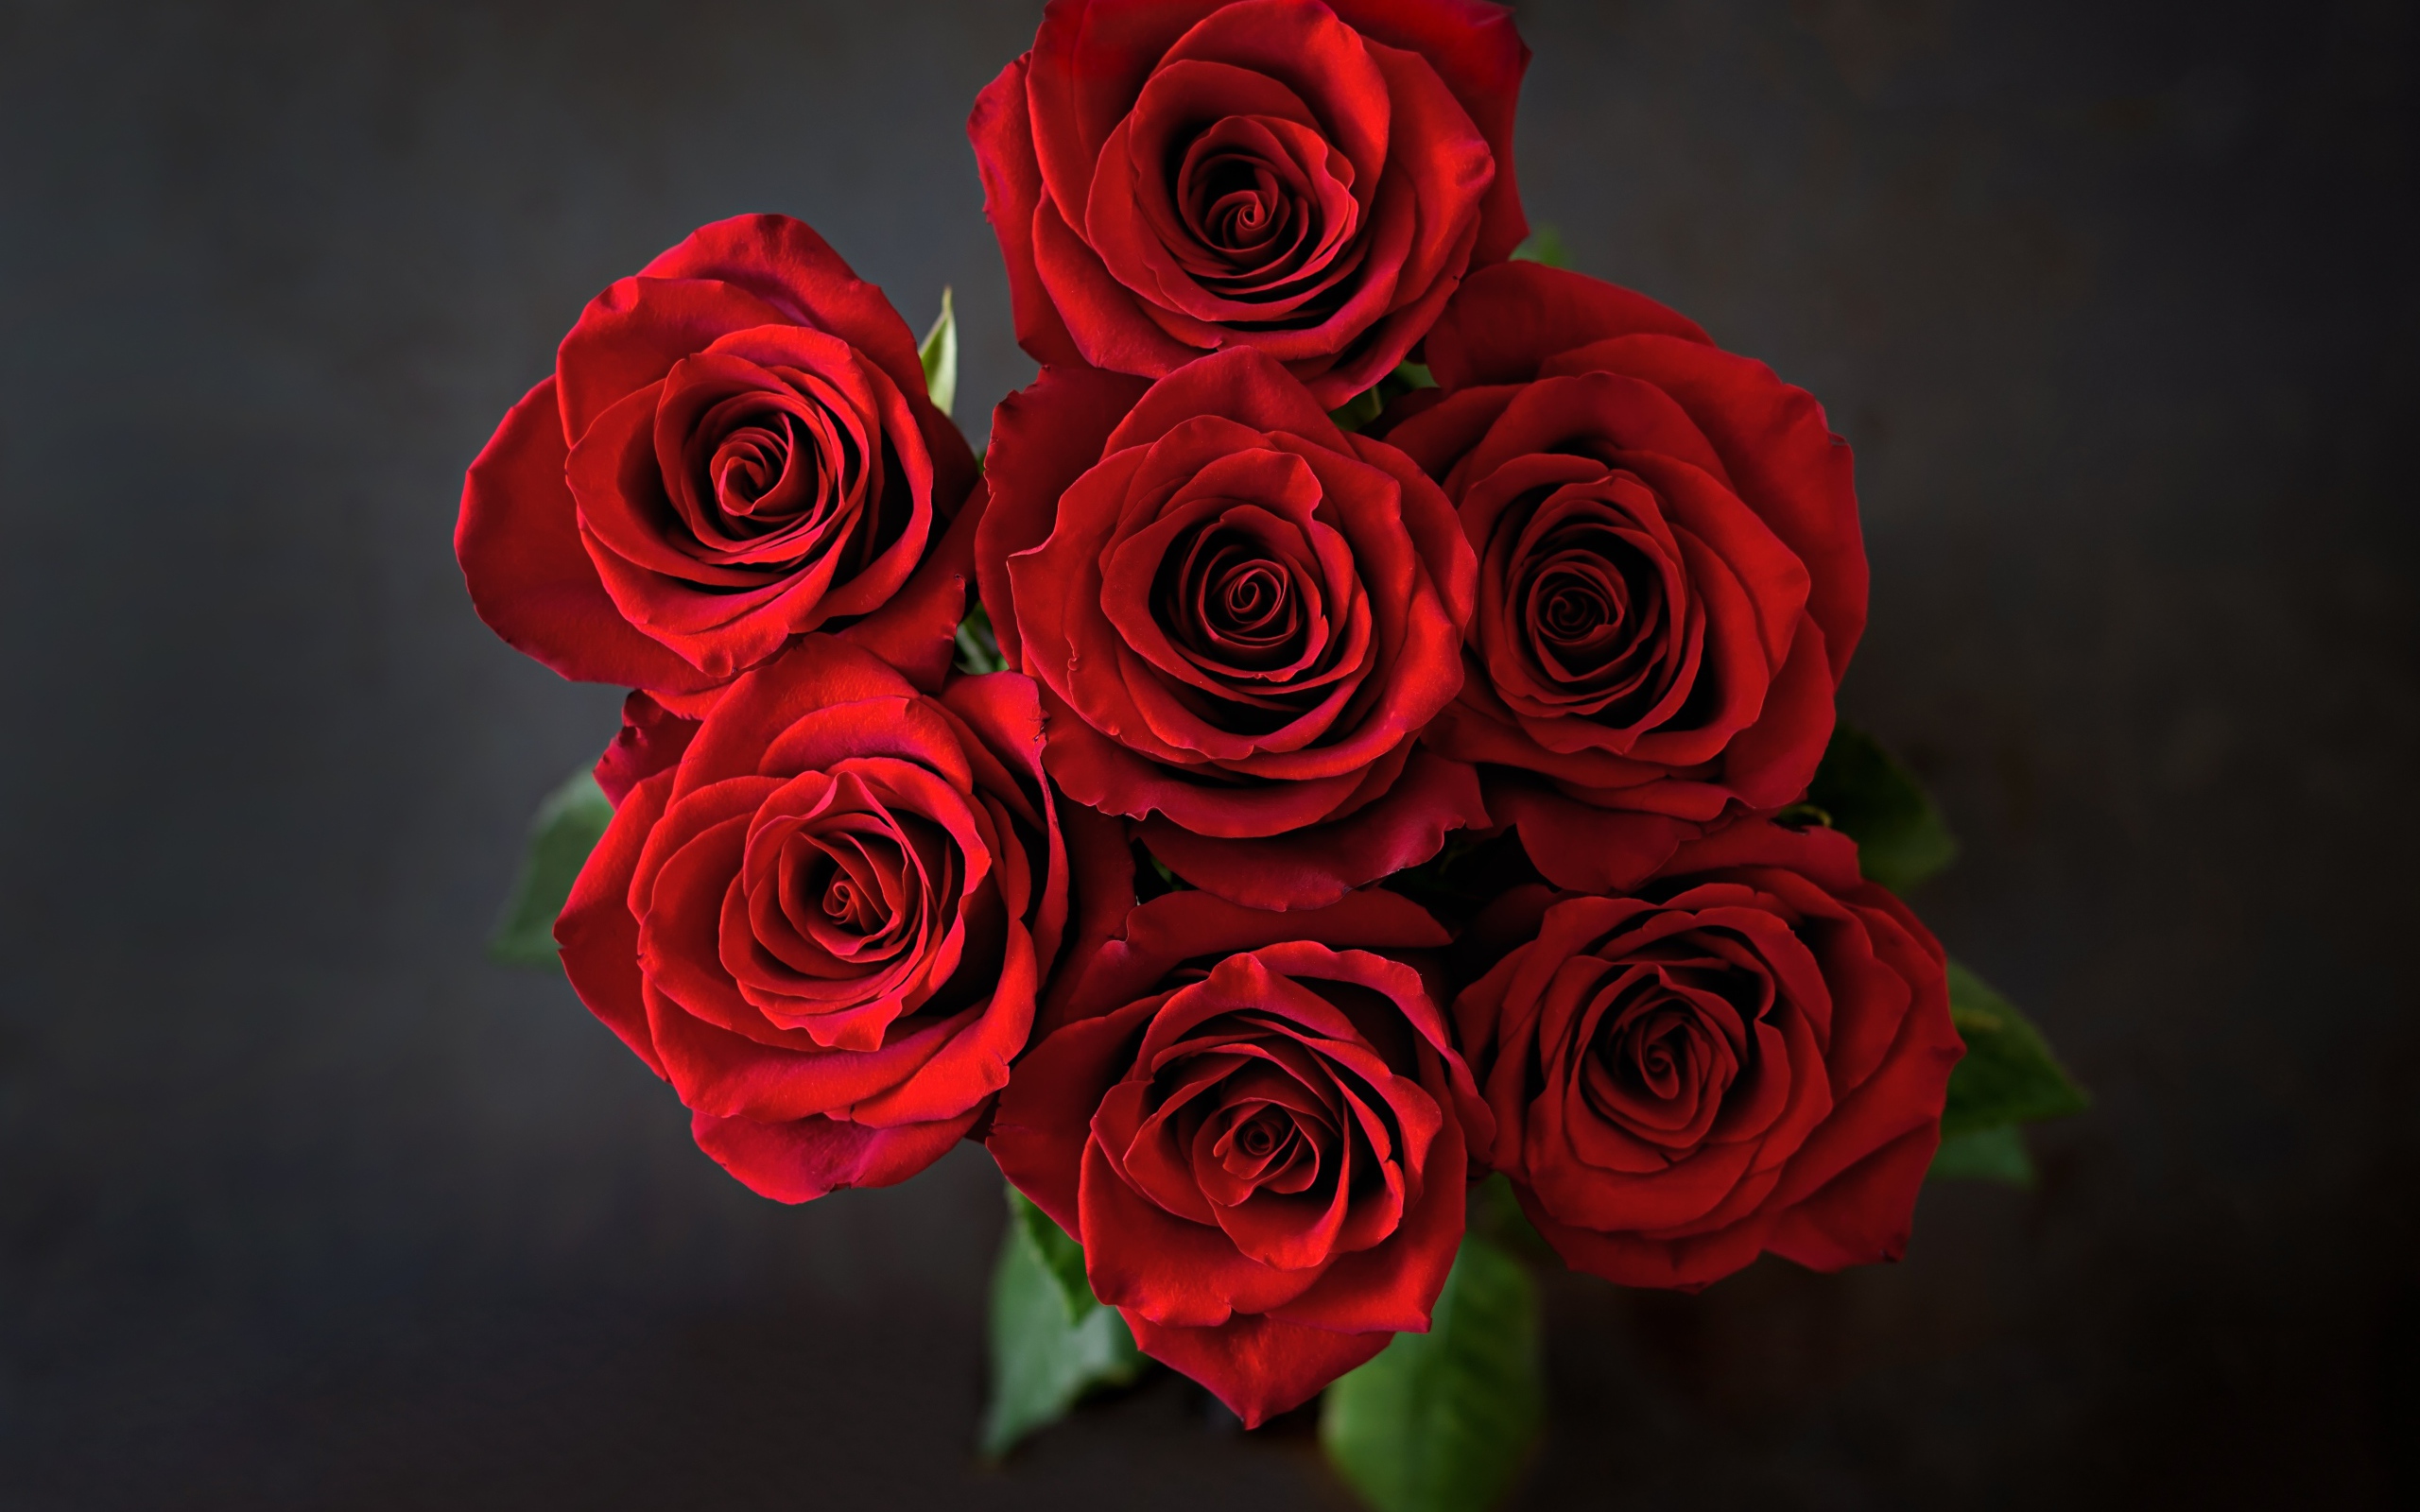 Bouquet of red roses on a gray background top view